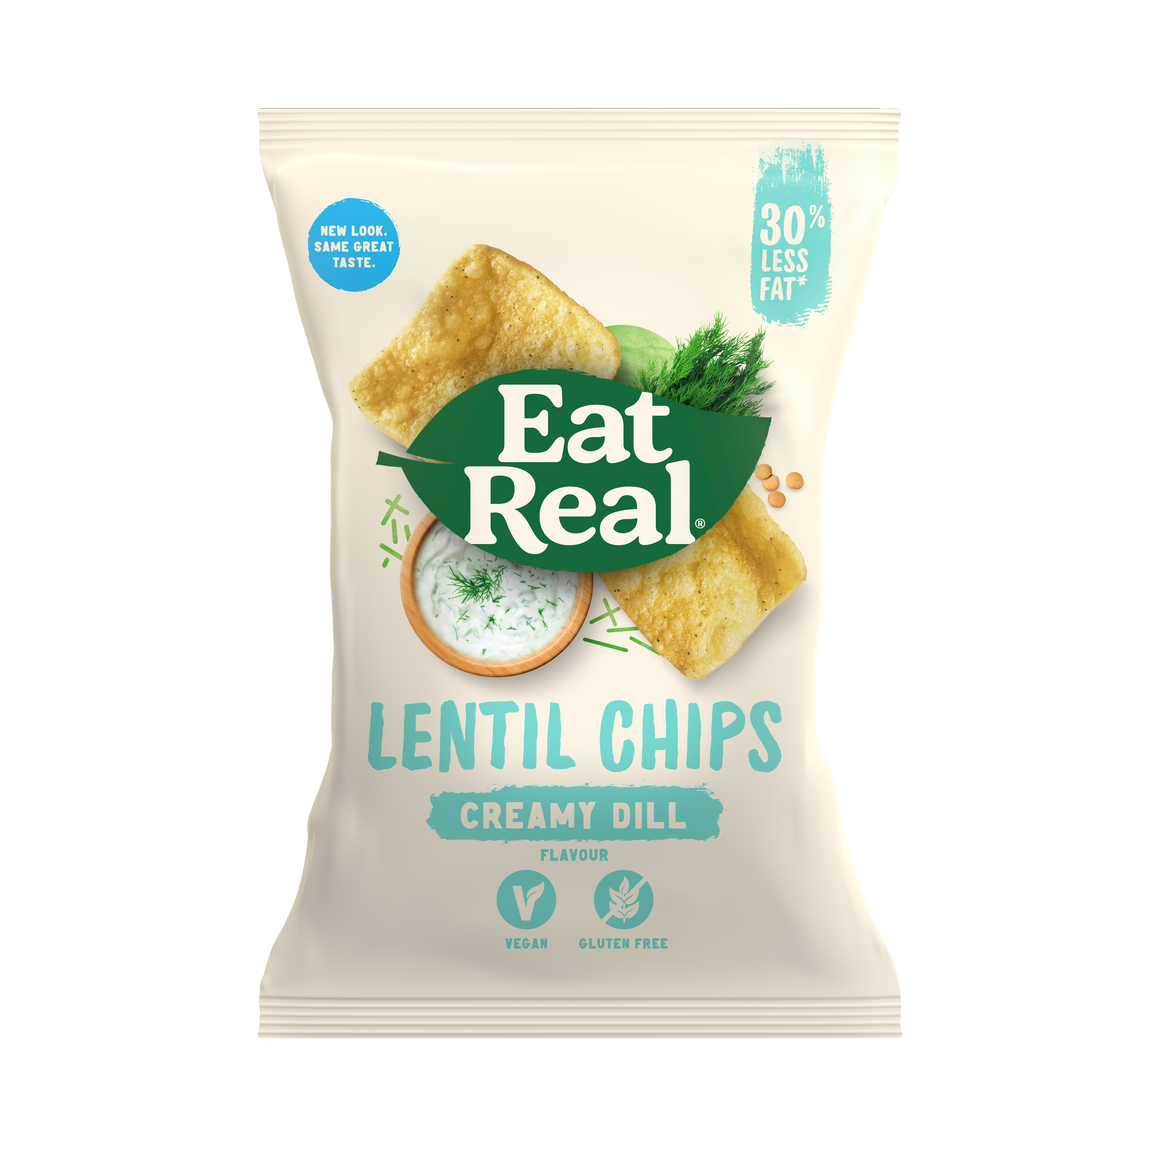 Eat Real Lentil Chips Creamy Dill 113gm Gluten Free and Vegan